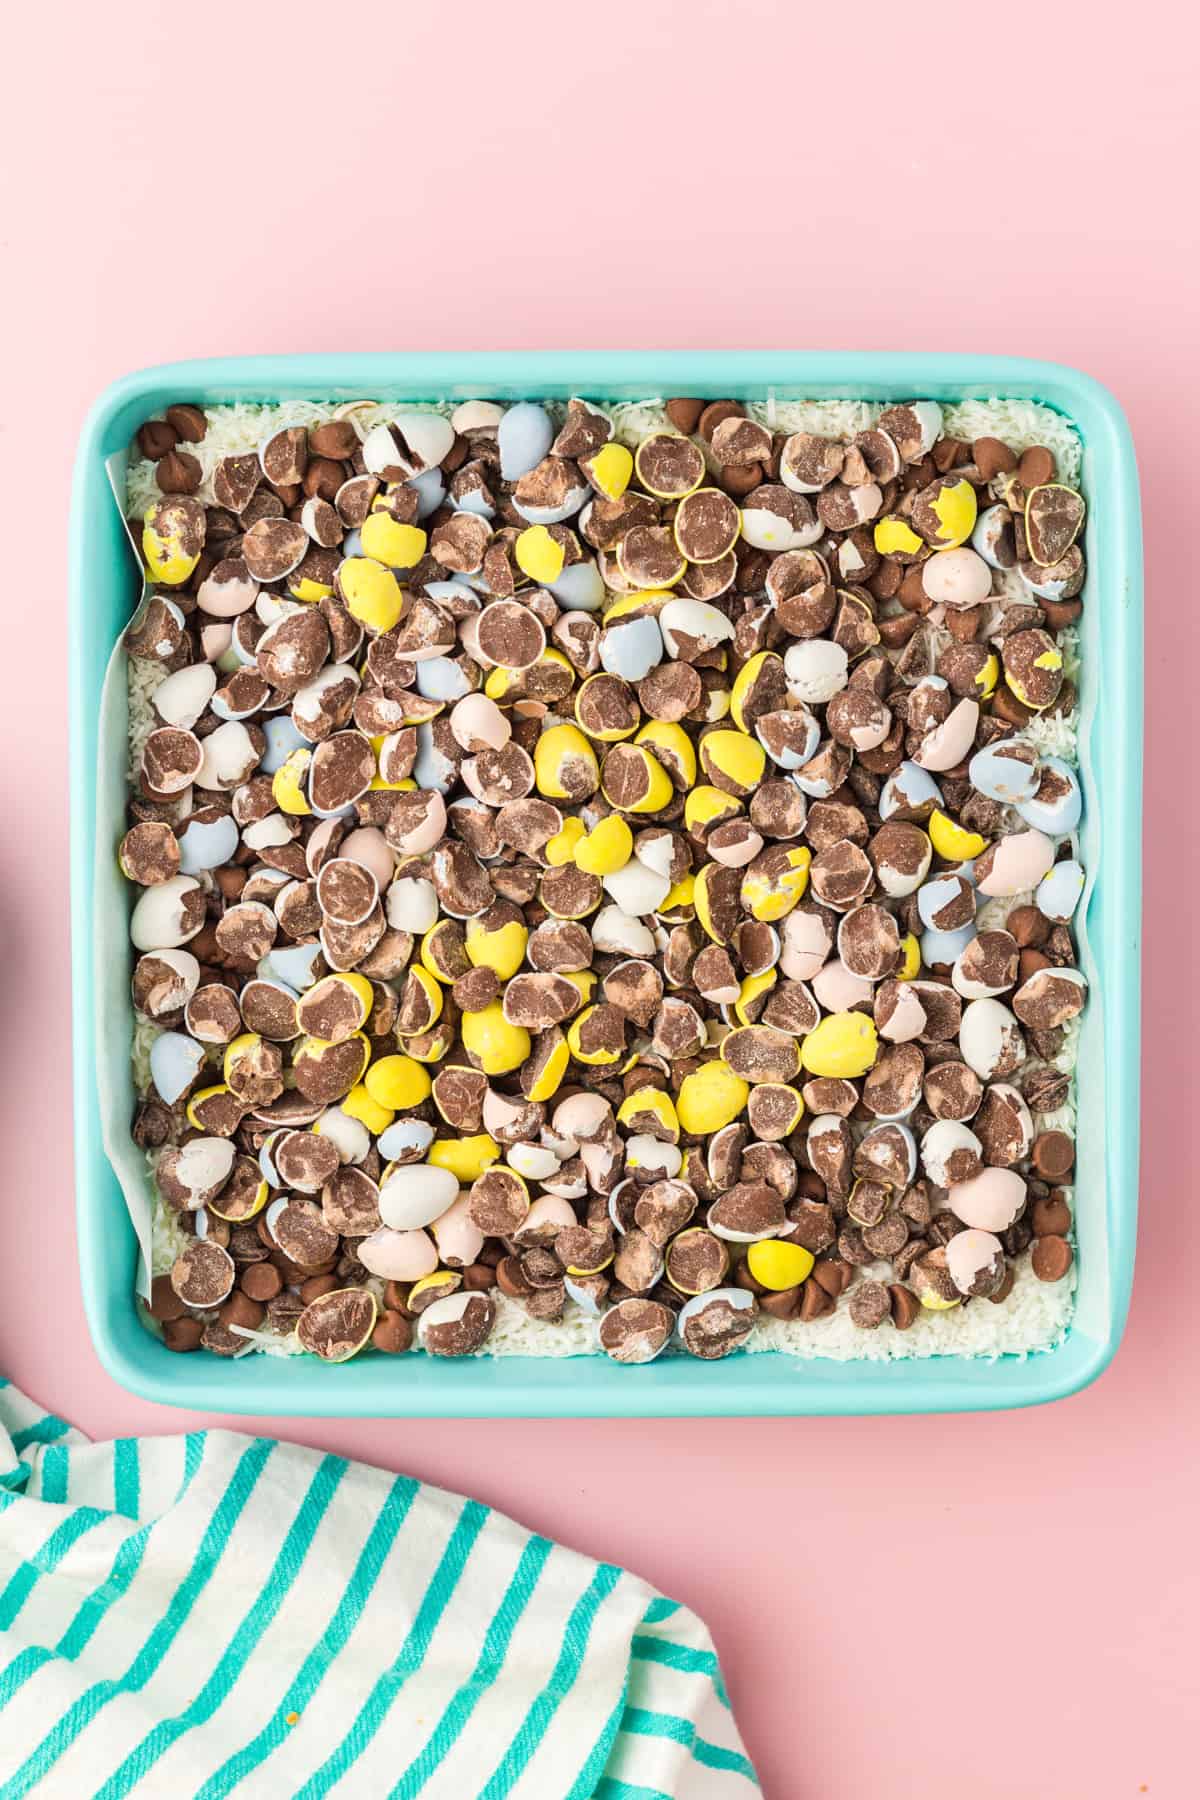 Crushed mini eggs on top of chocolate chips and shredded coconut in square baking pan.